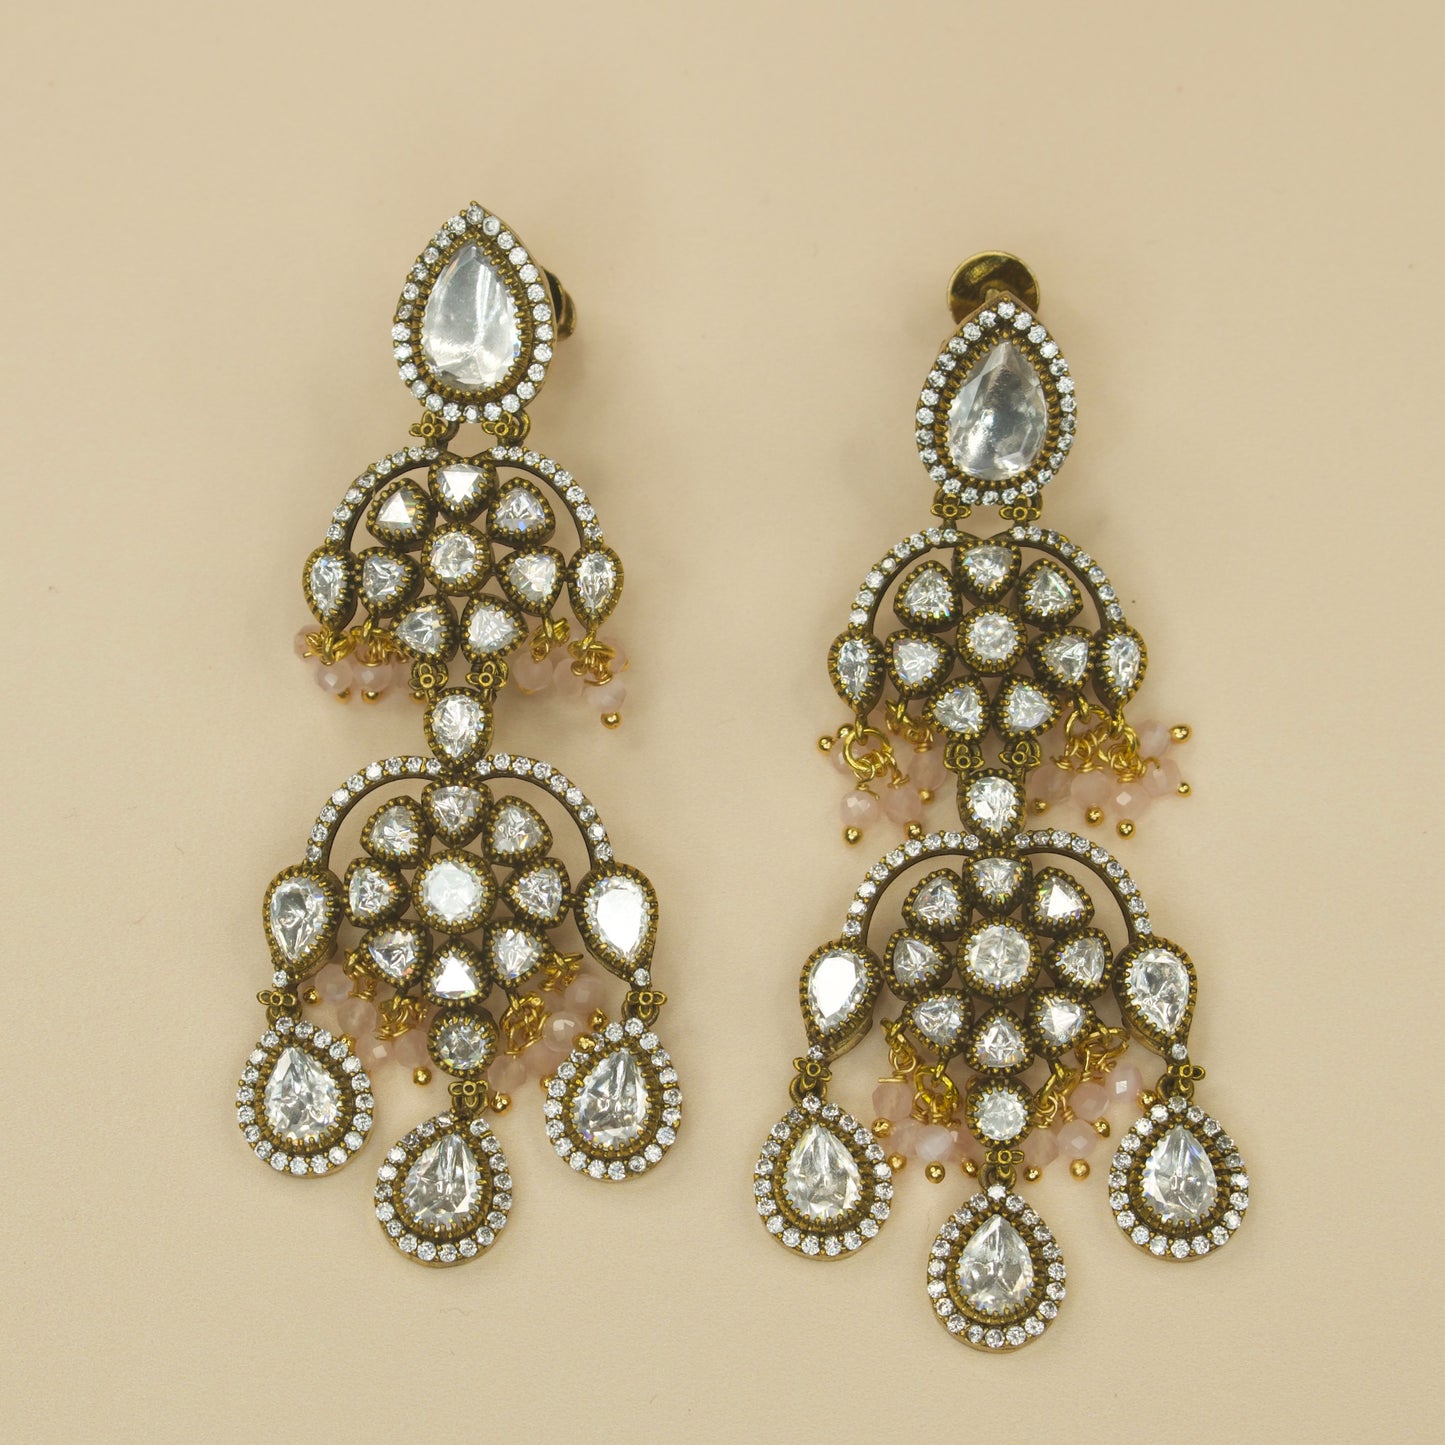 Designer Victorian Floral Earrings with screw-back. This Victorian Jewellery Is available in Pink & Mint colour varaiants. 